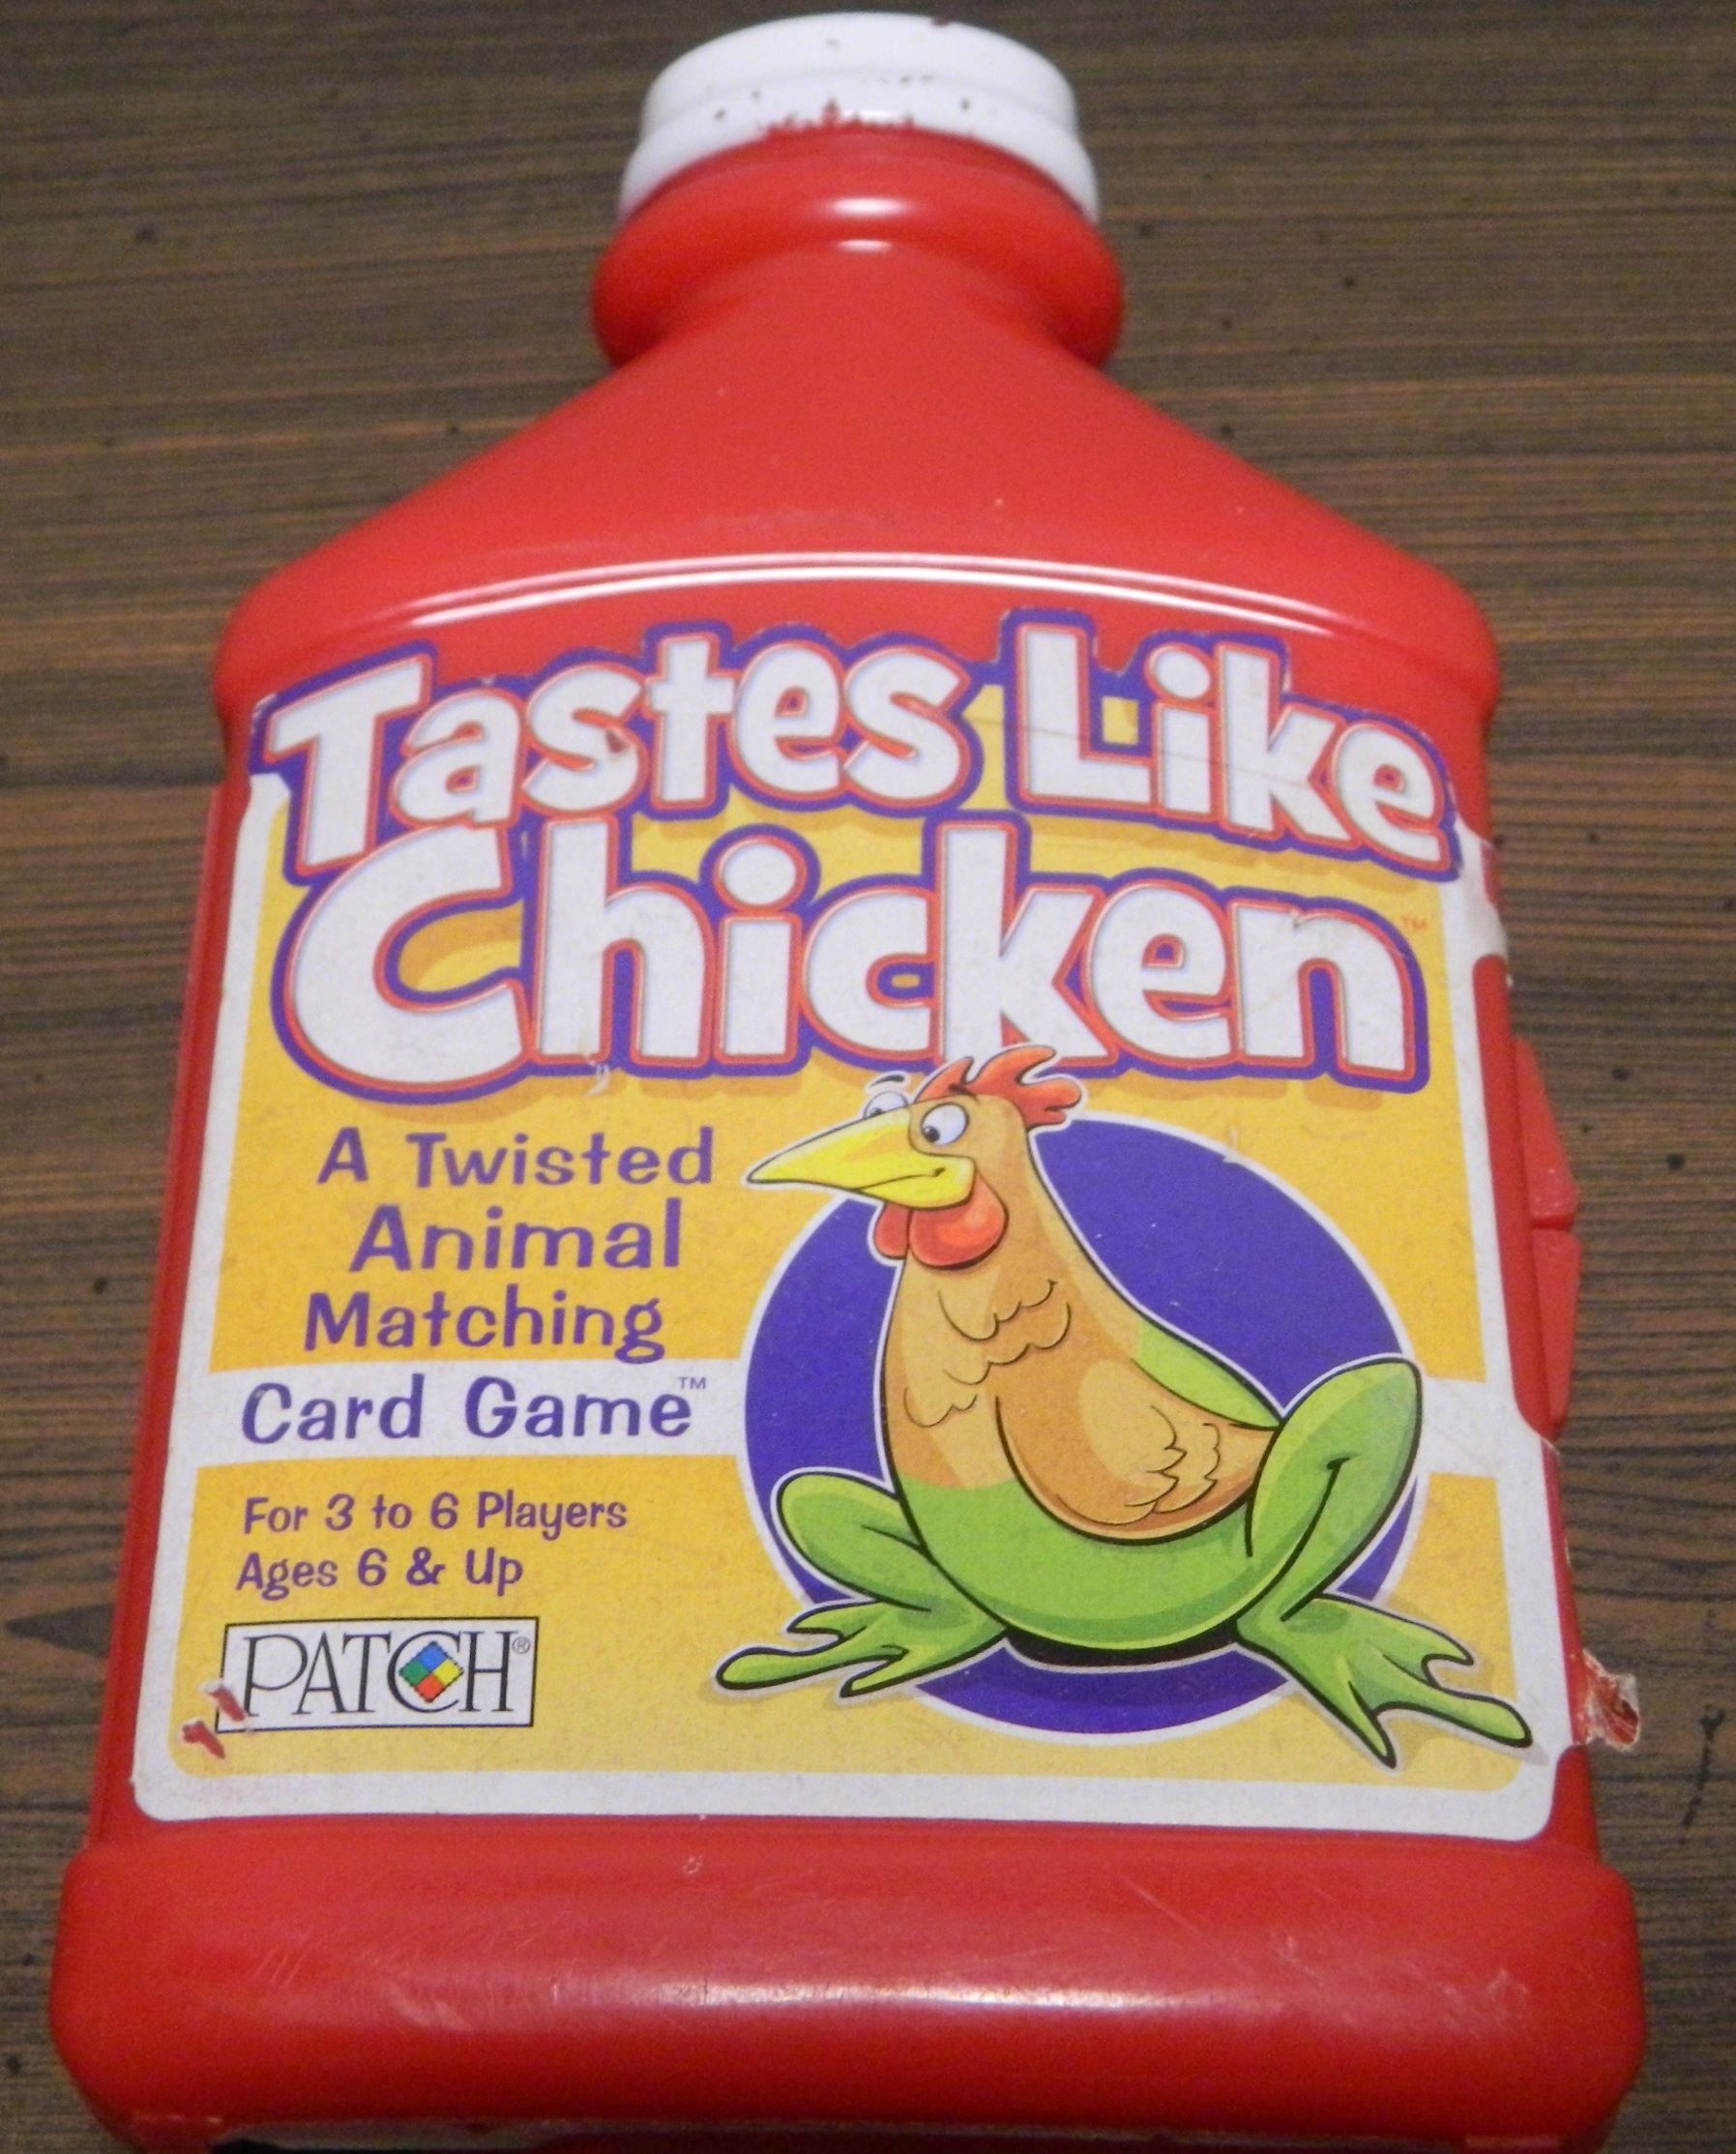 Tastes Like Chicken Card Game Review and Rules